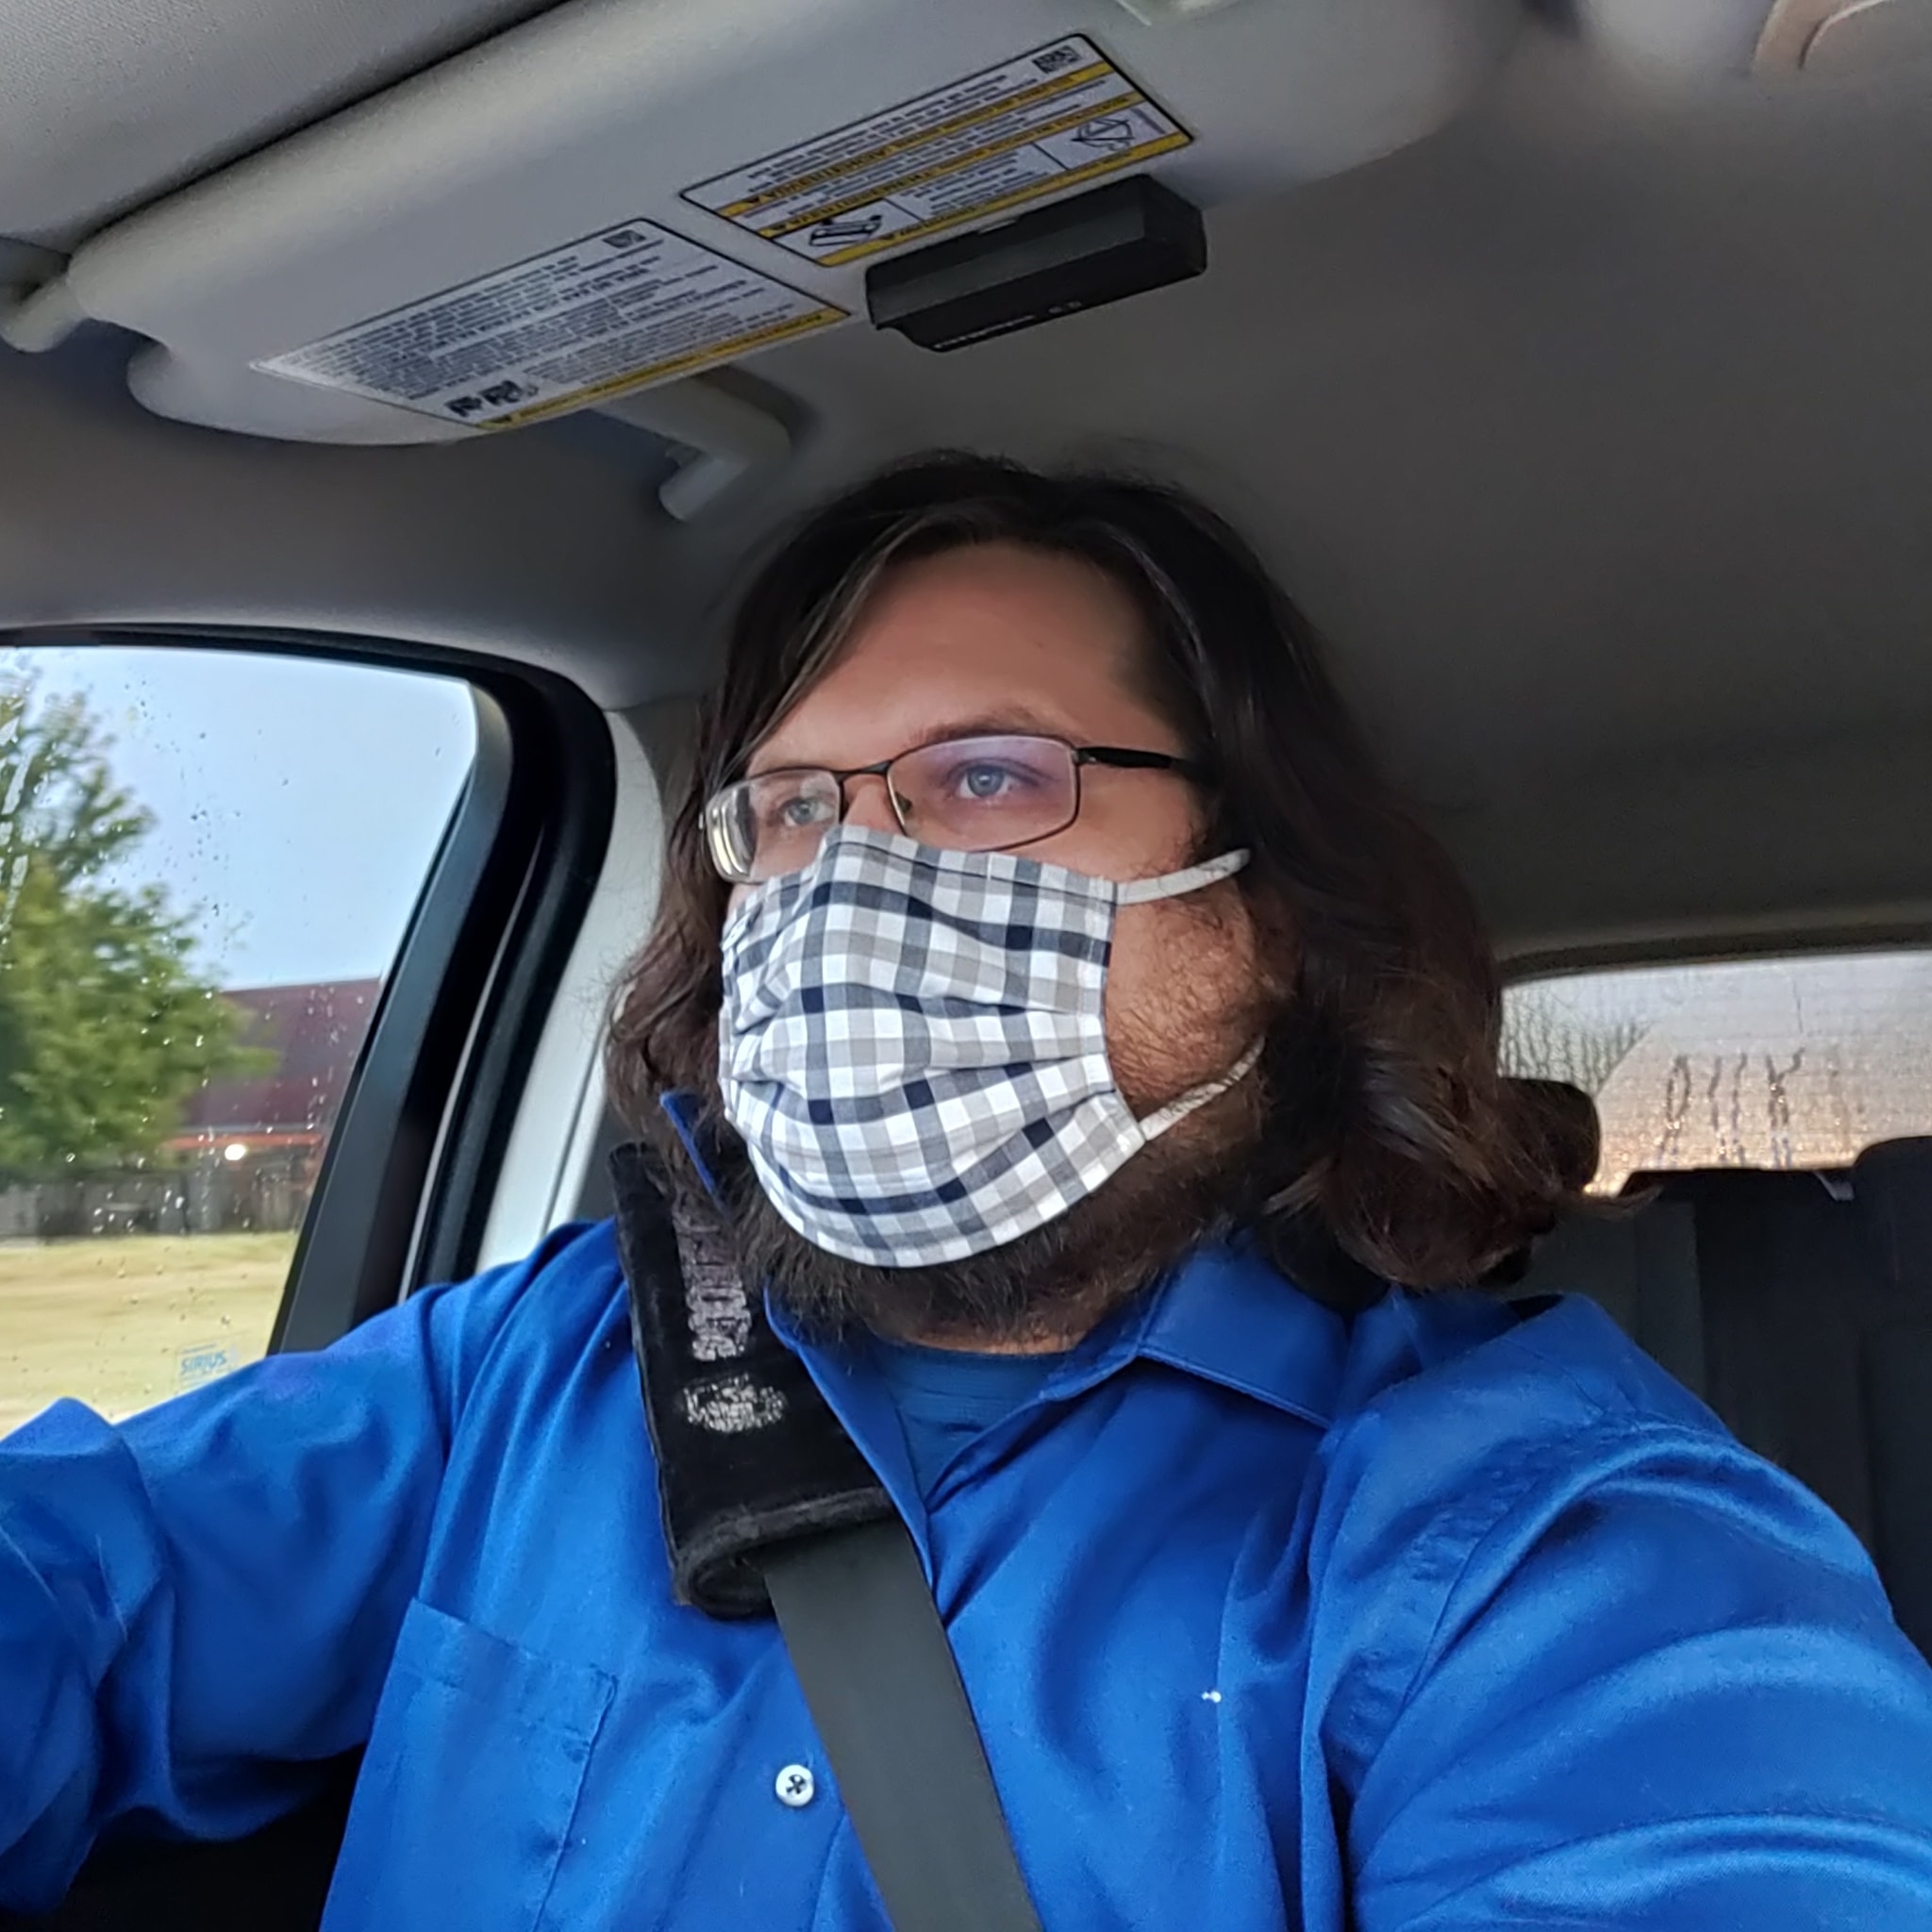 A person with shoulder-length dark hair, gingham mask, blue button-down shirt and rectangular glasses sits in the front seat of a car